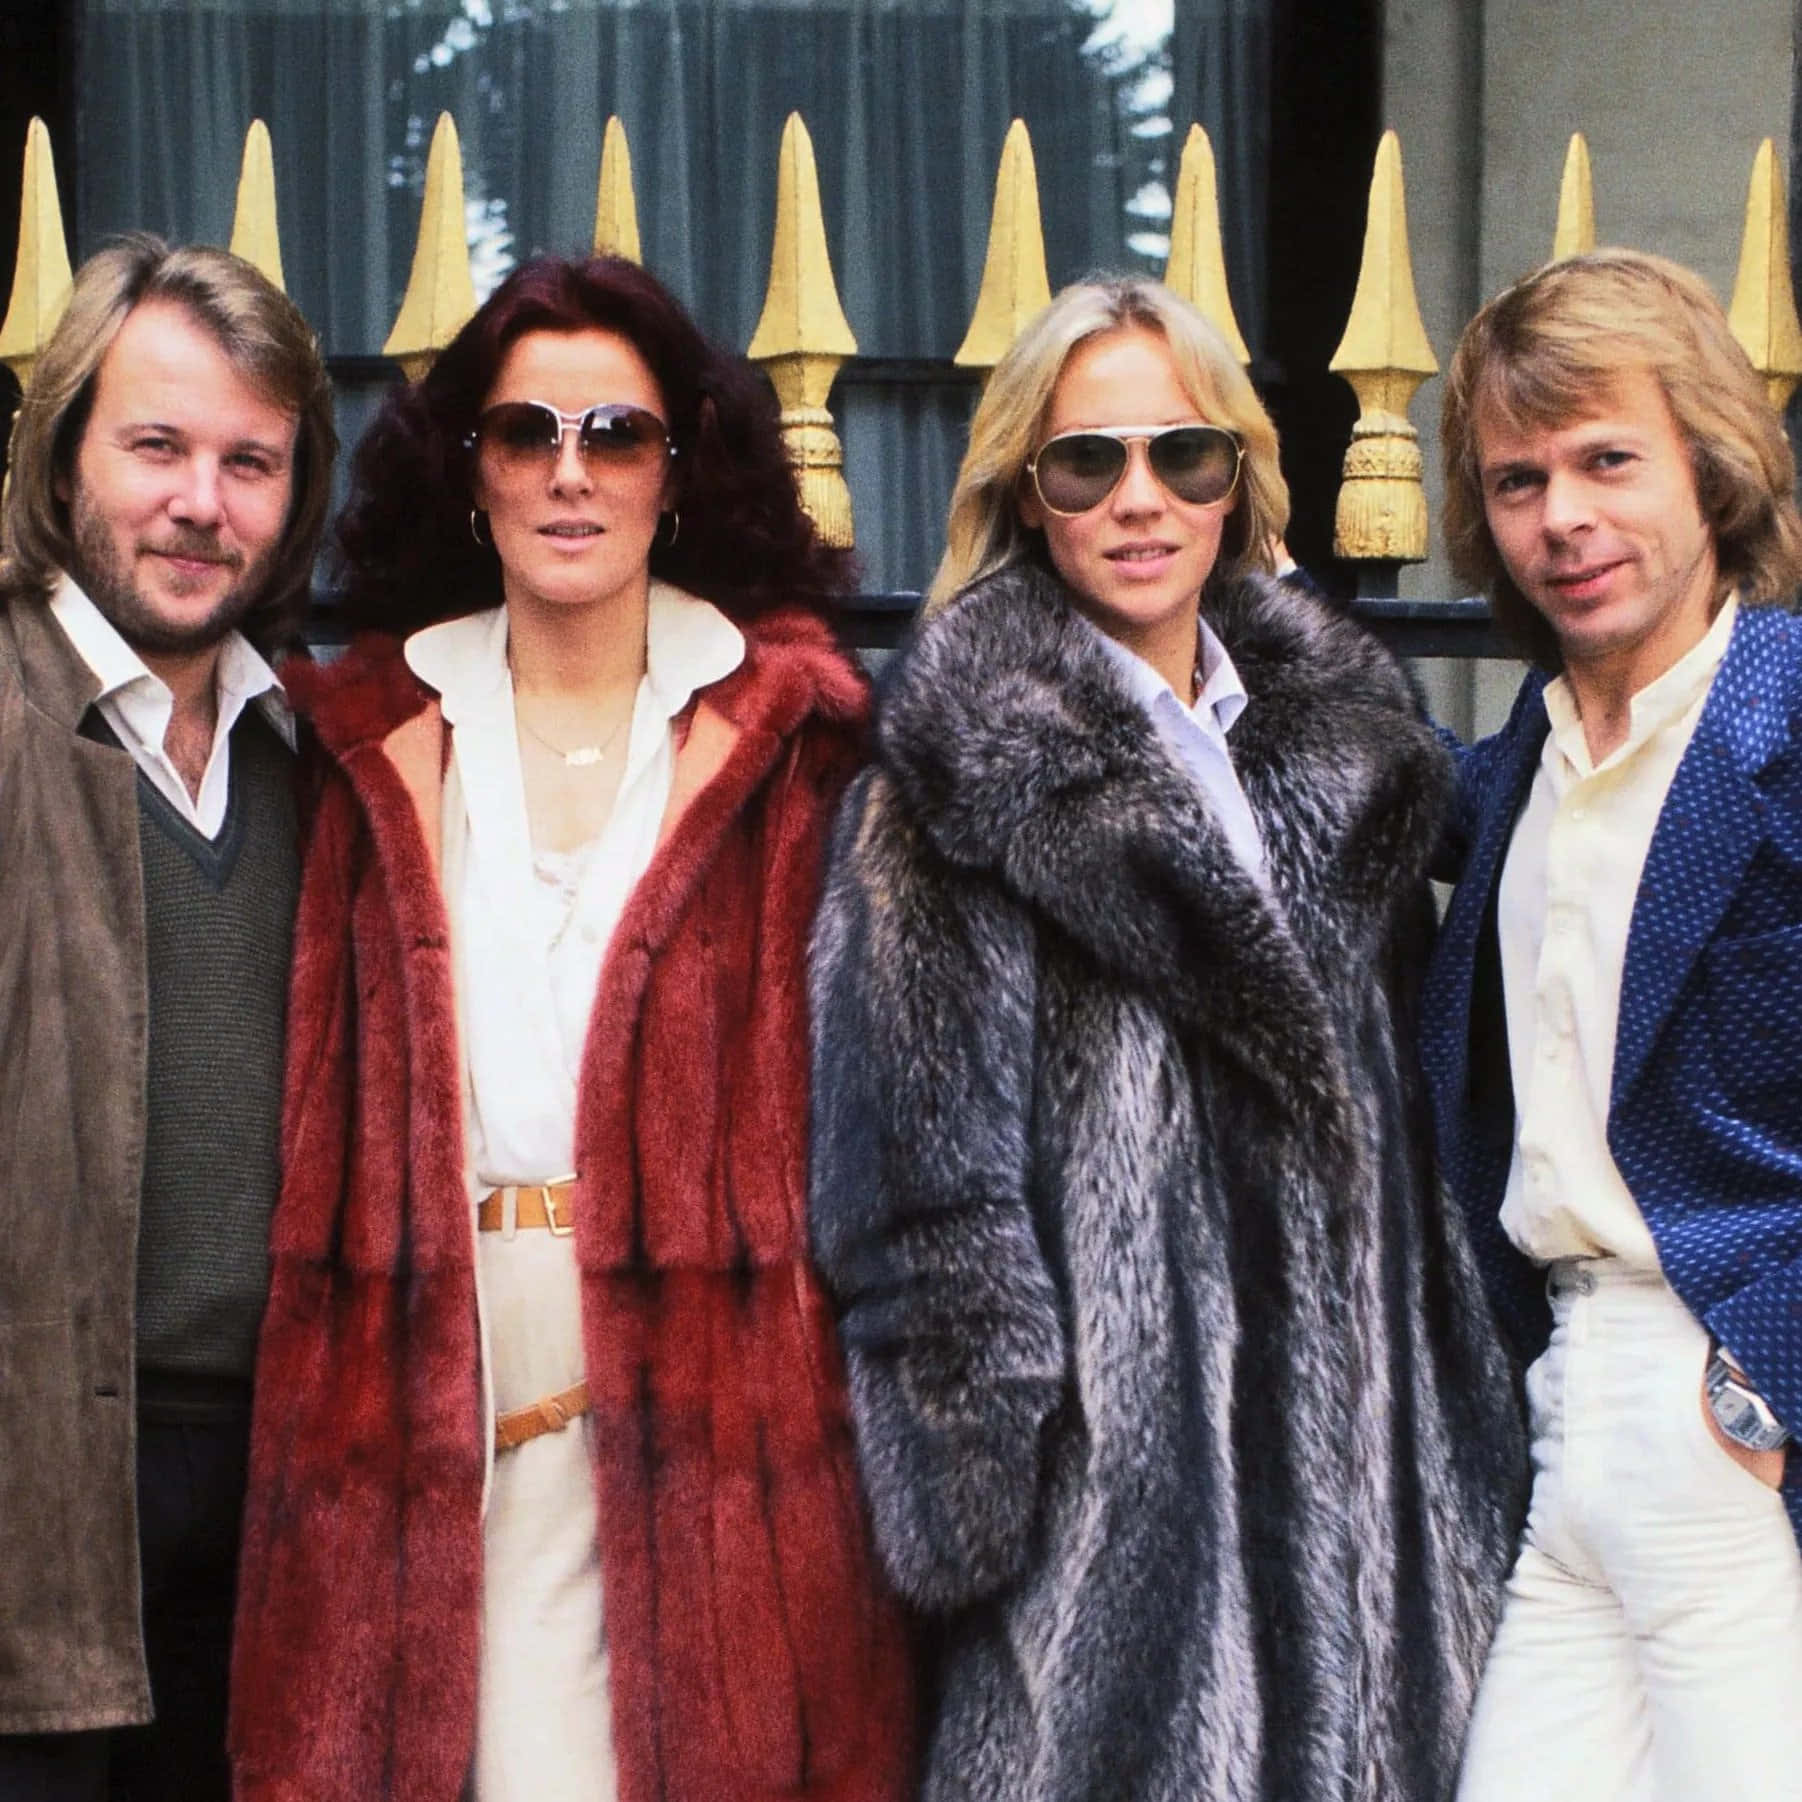 Swedish Band Abba Poses For the Camera